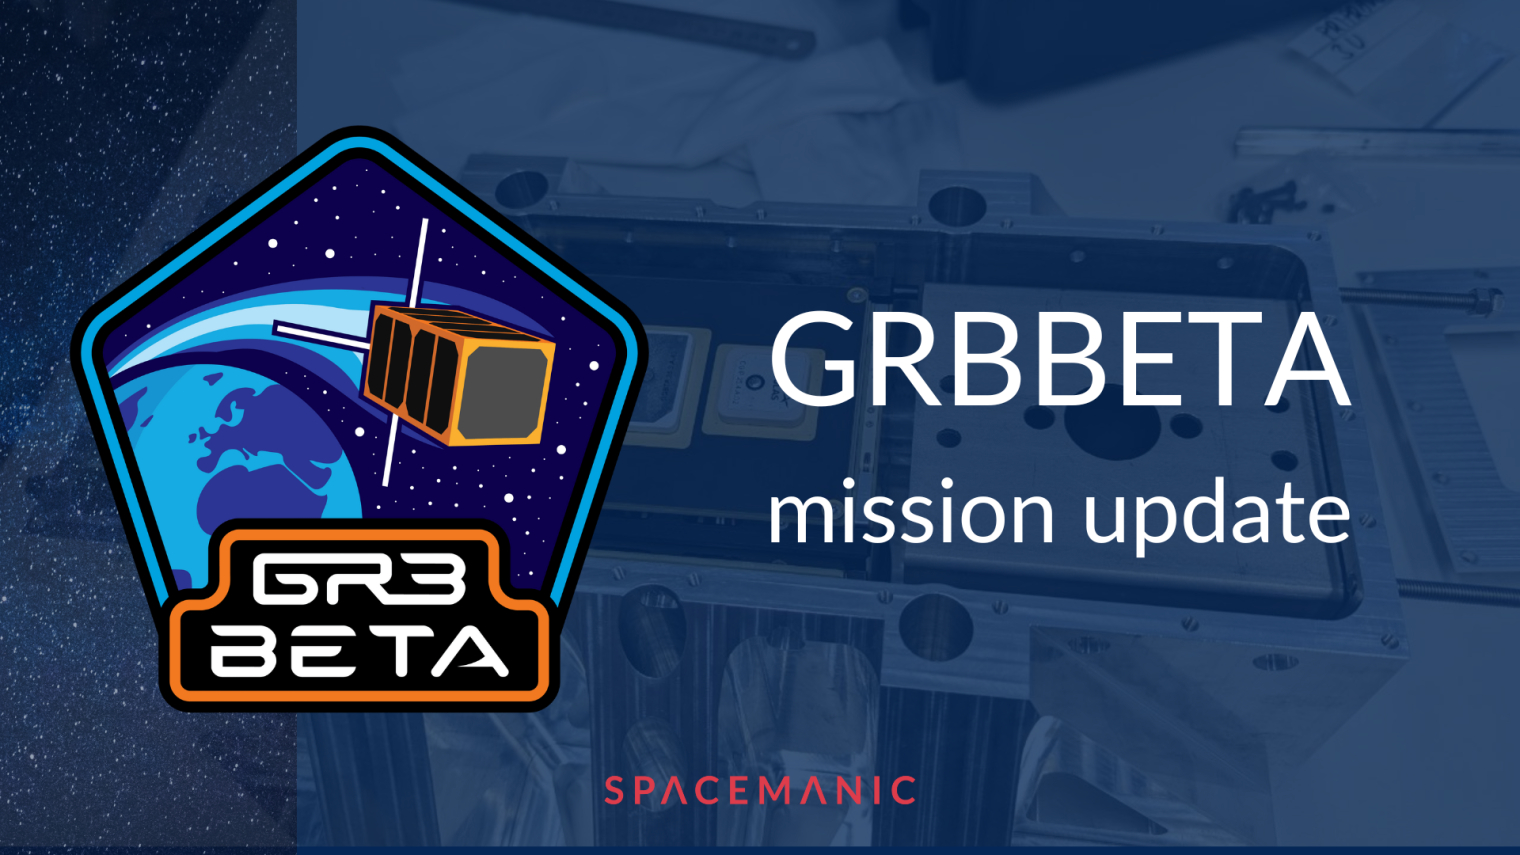 GRBBETA: A new amateur radio mission soon to sail the skies